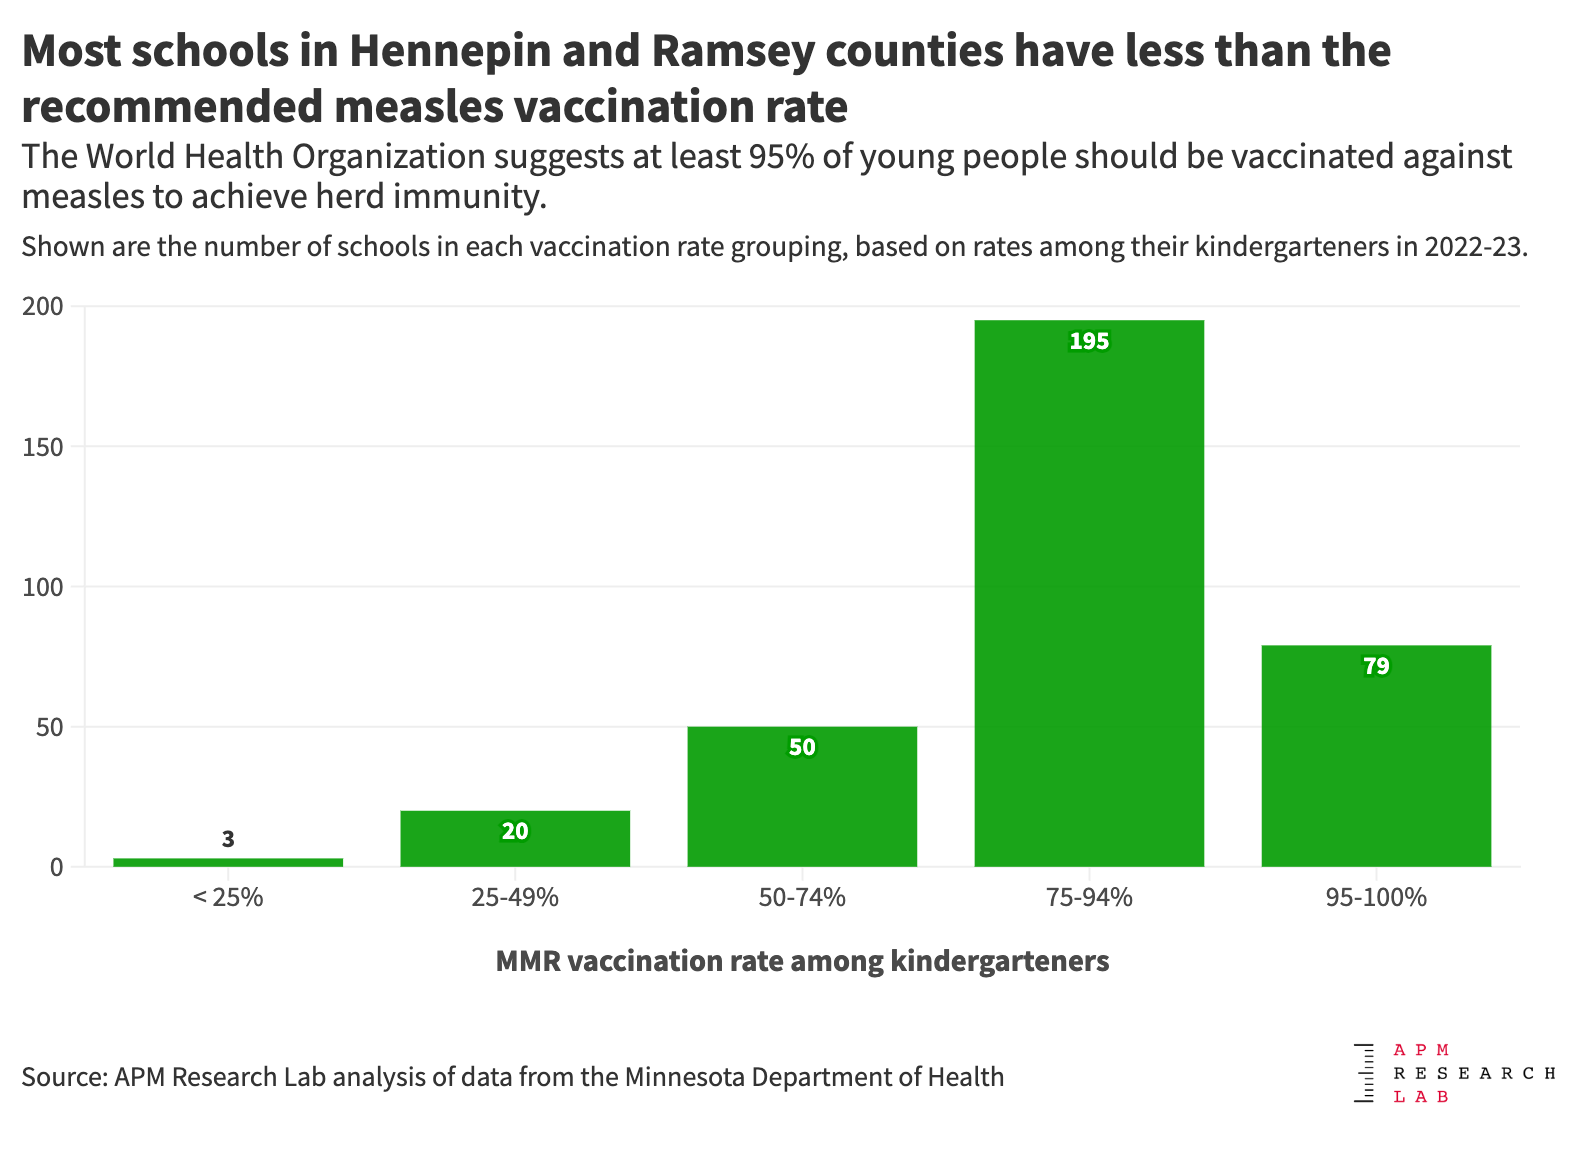 Graph showing kindergarten vaccination levels by number of schools in Hennepin and Ramsey Counties